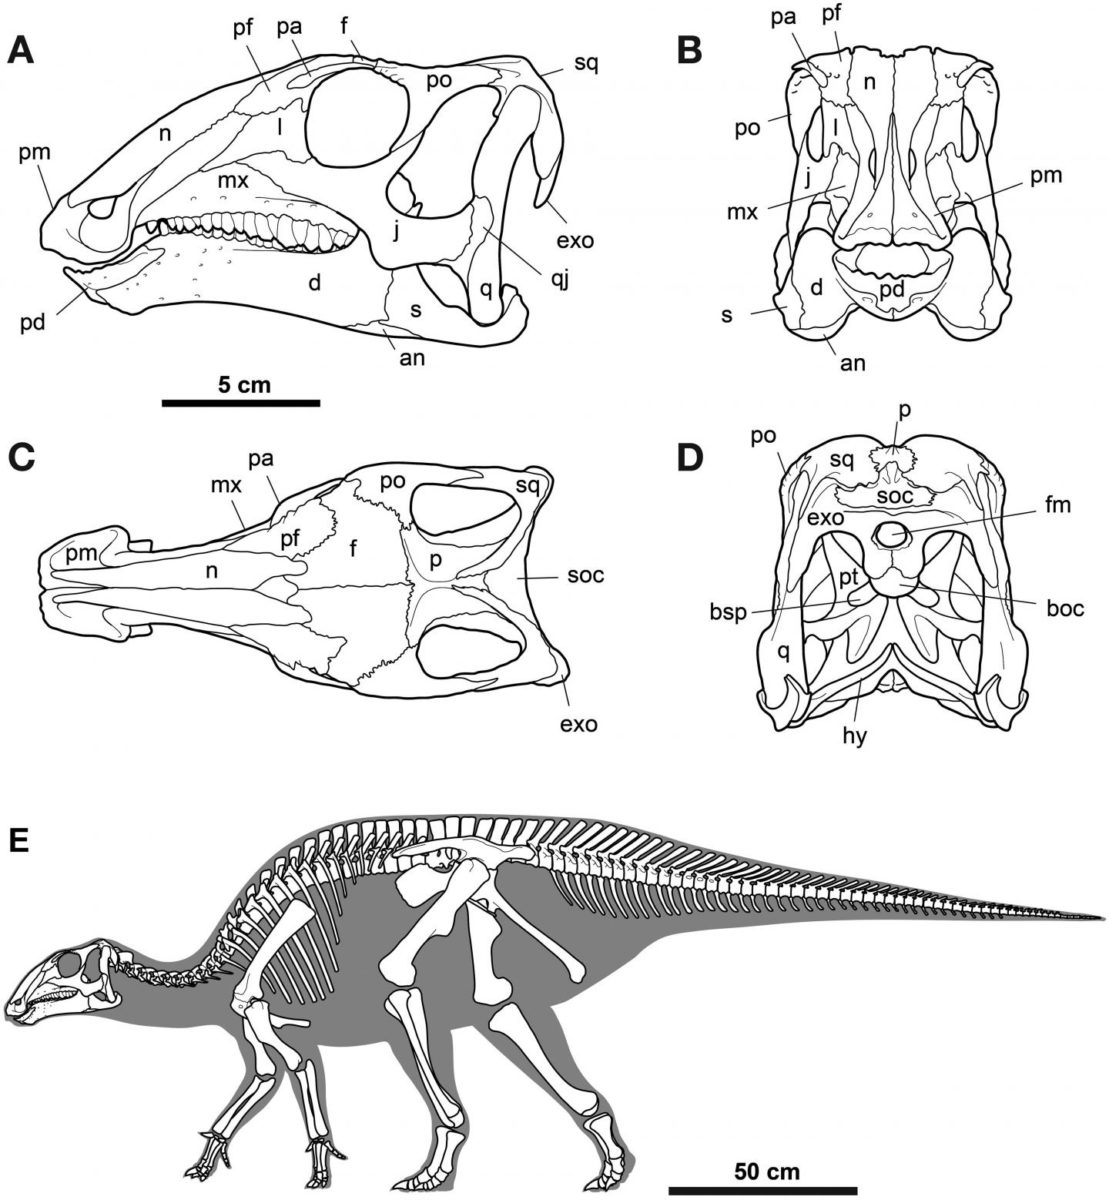 These are skeletal reconstructions of Gobihadros mongoliensis.
Credit: Tsogtbaatar et al, 2019.